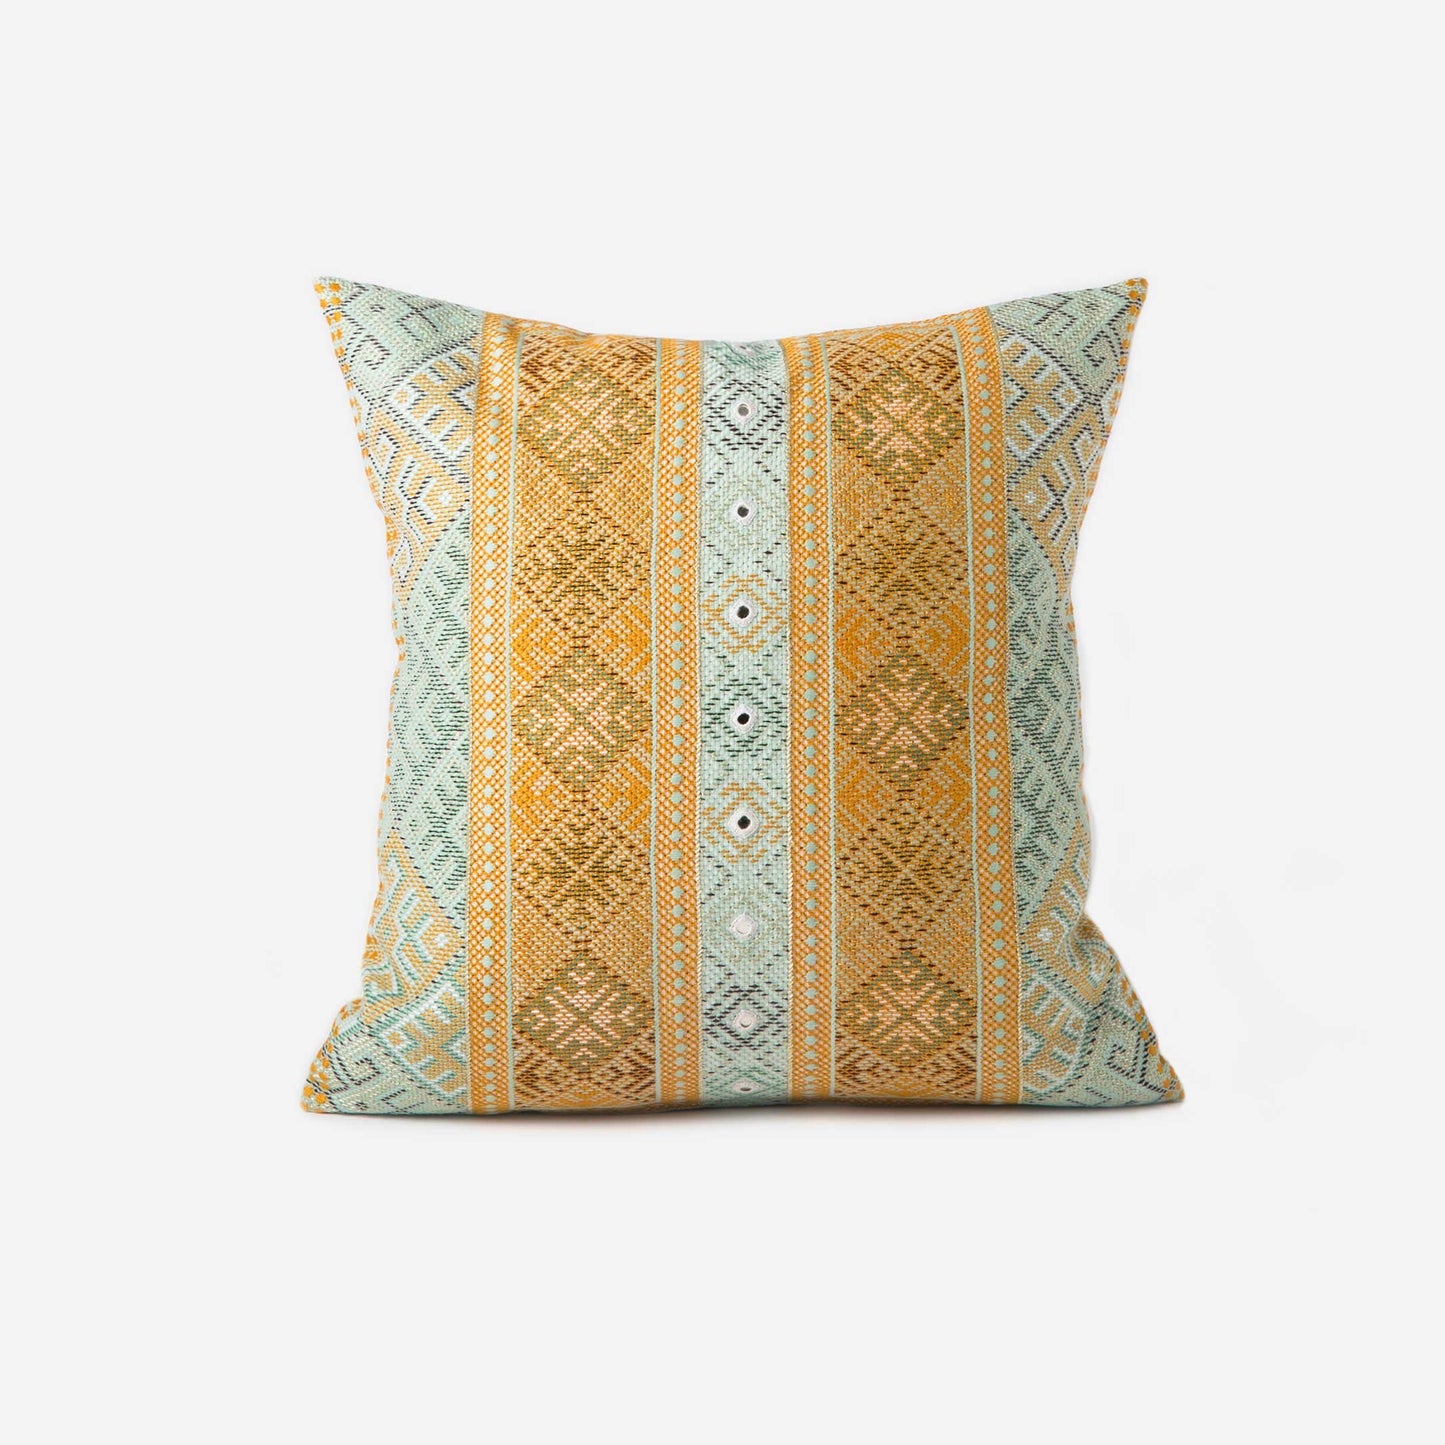 Sage/ Orange Noor editioned cushion with intense Baluchi embroidery and mirrors 